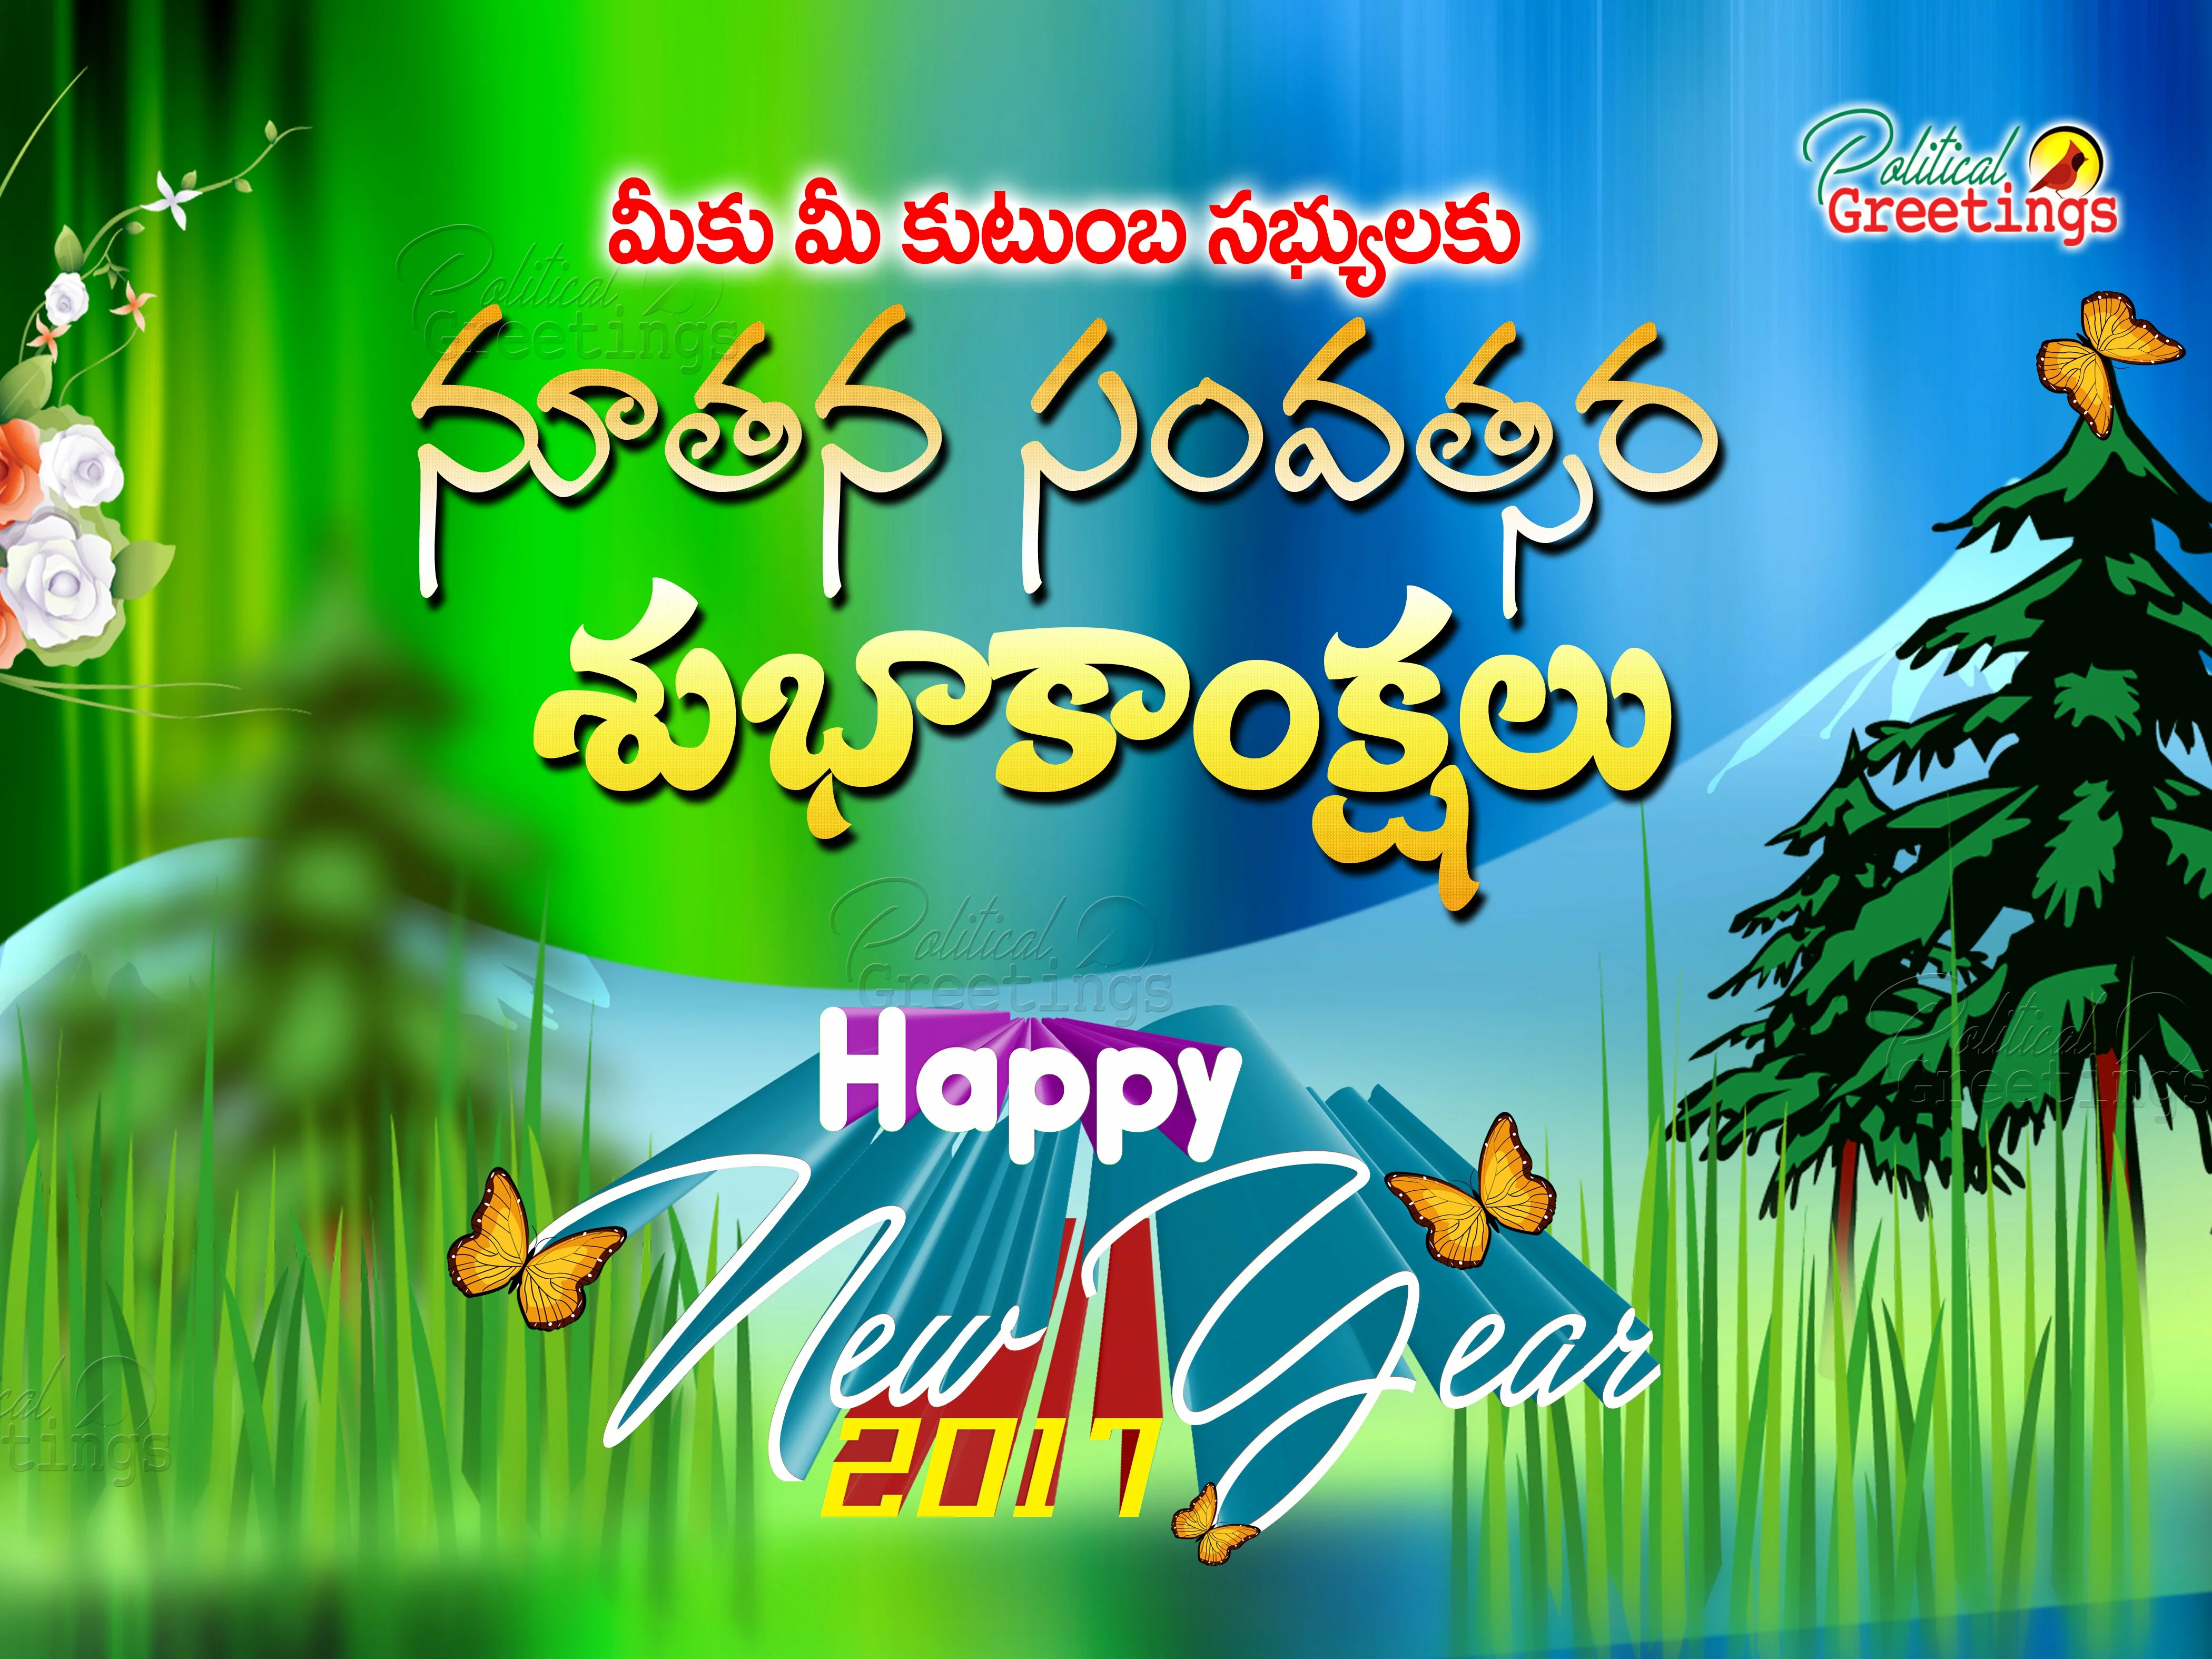 2017-happy-new-year-telugu-wishes-and-greetings-hd-wallpapers-politicalgreetings